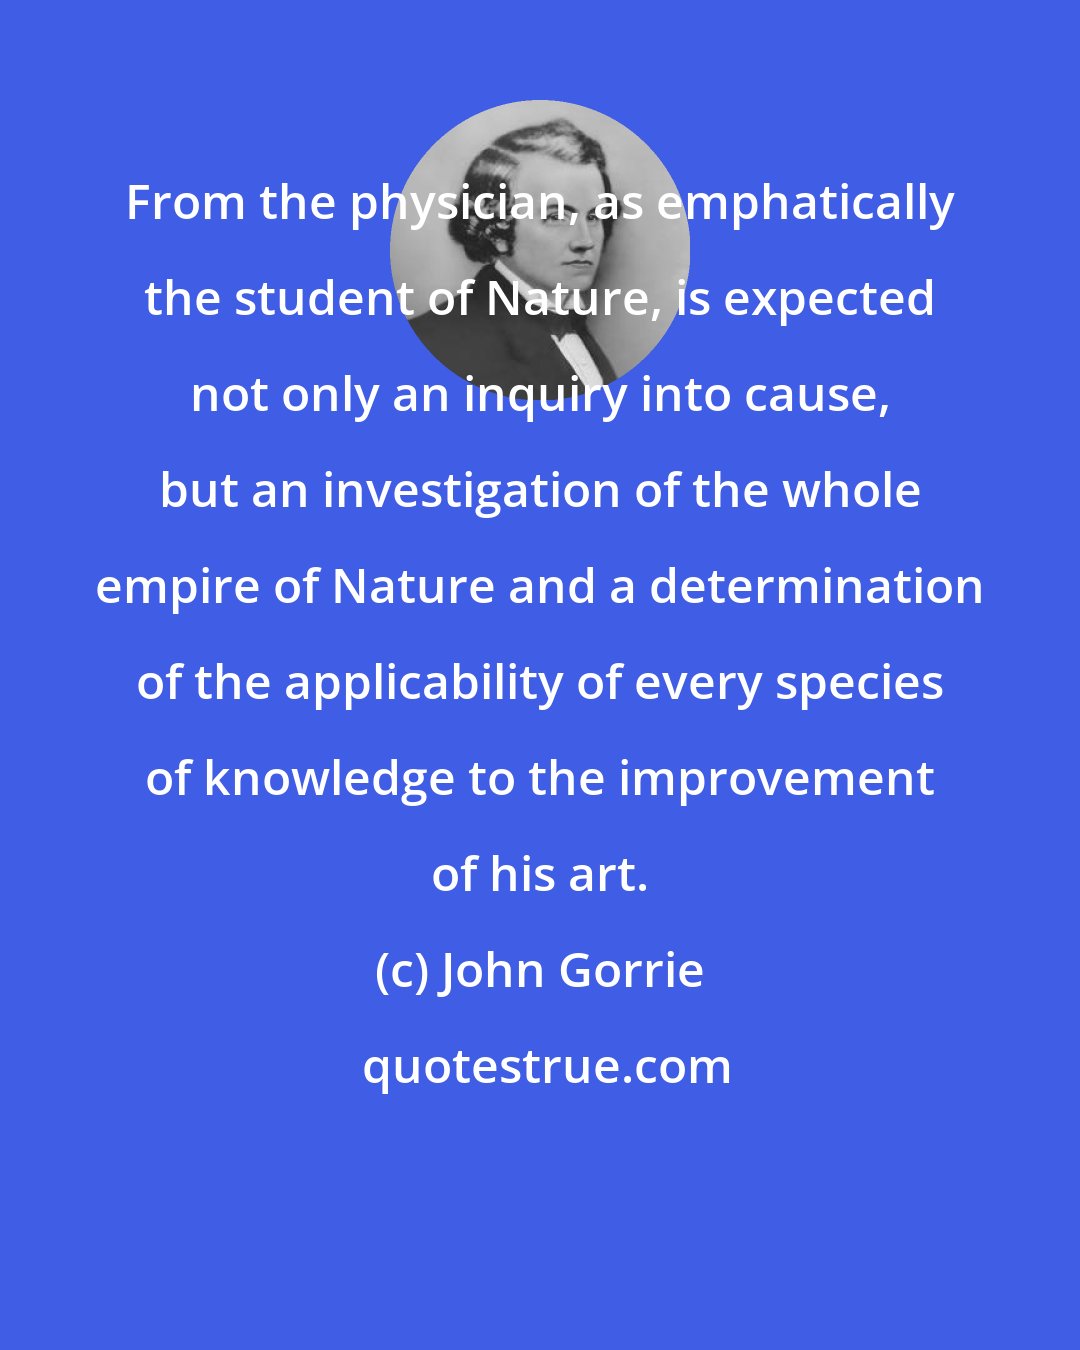 John Gorrie: From the physician, as emphatically the student of Nature, is expected not only an inquiry into cause, but an investigation of the whole empire of Nature and a determination of the applicability of every species of knowledge to the improvement of his art.